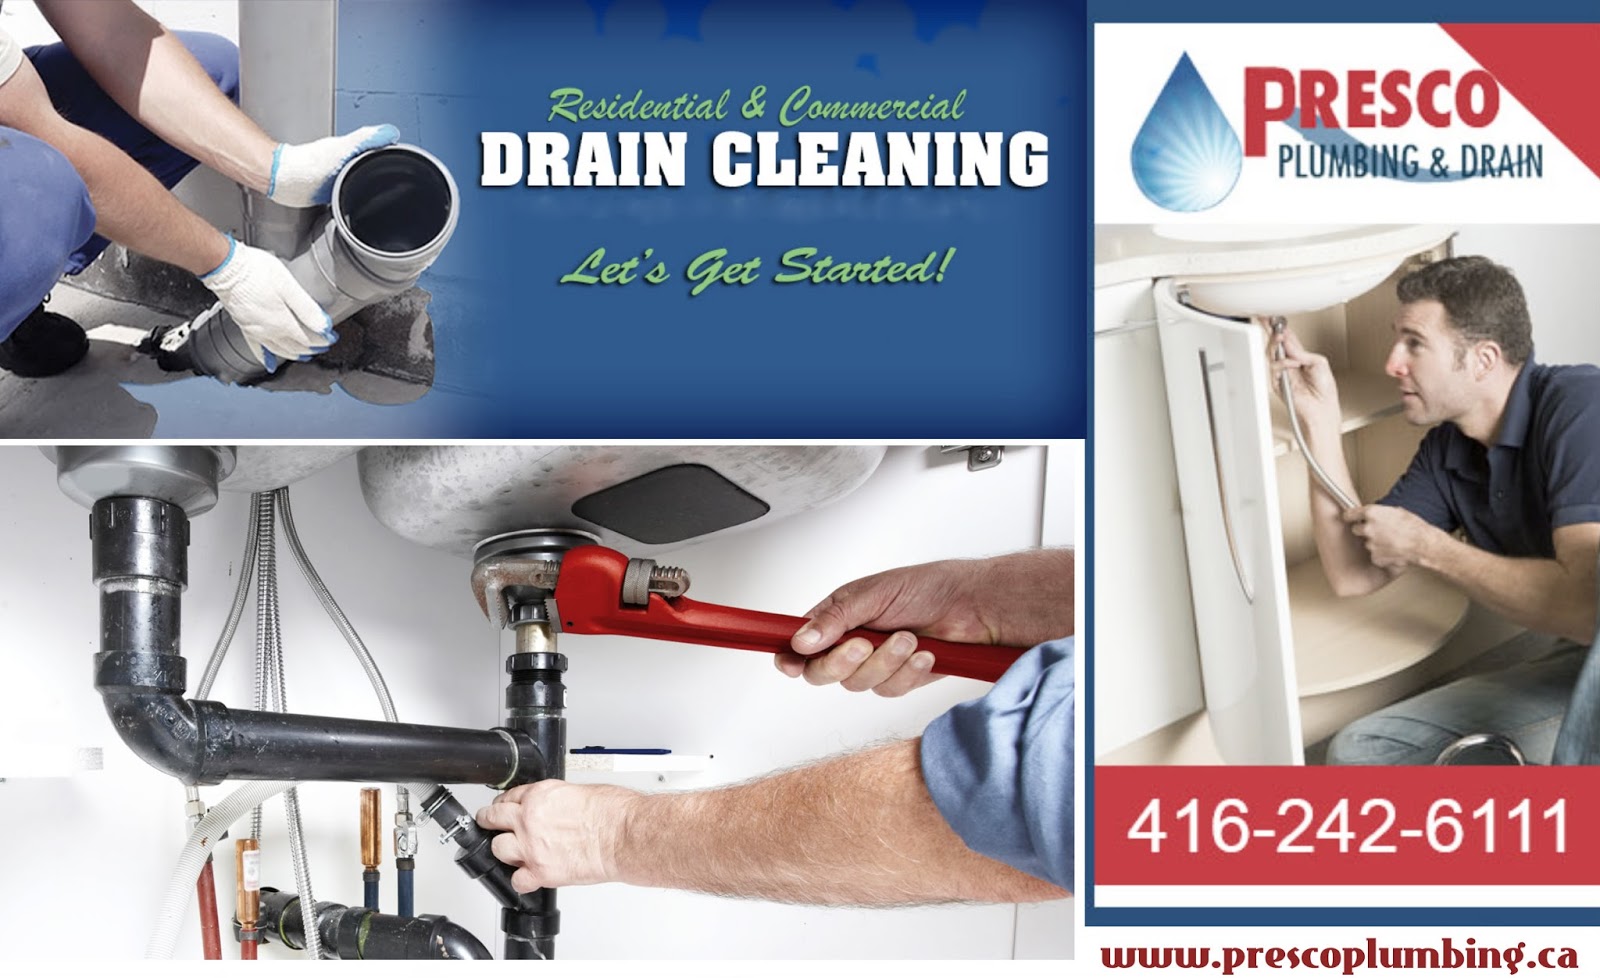 Drain Cleaning.Source Drain Cleaner Tool S125 Cleaning ...